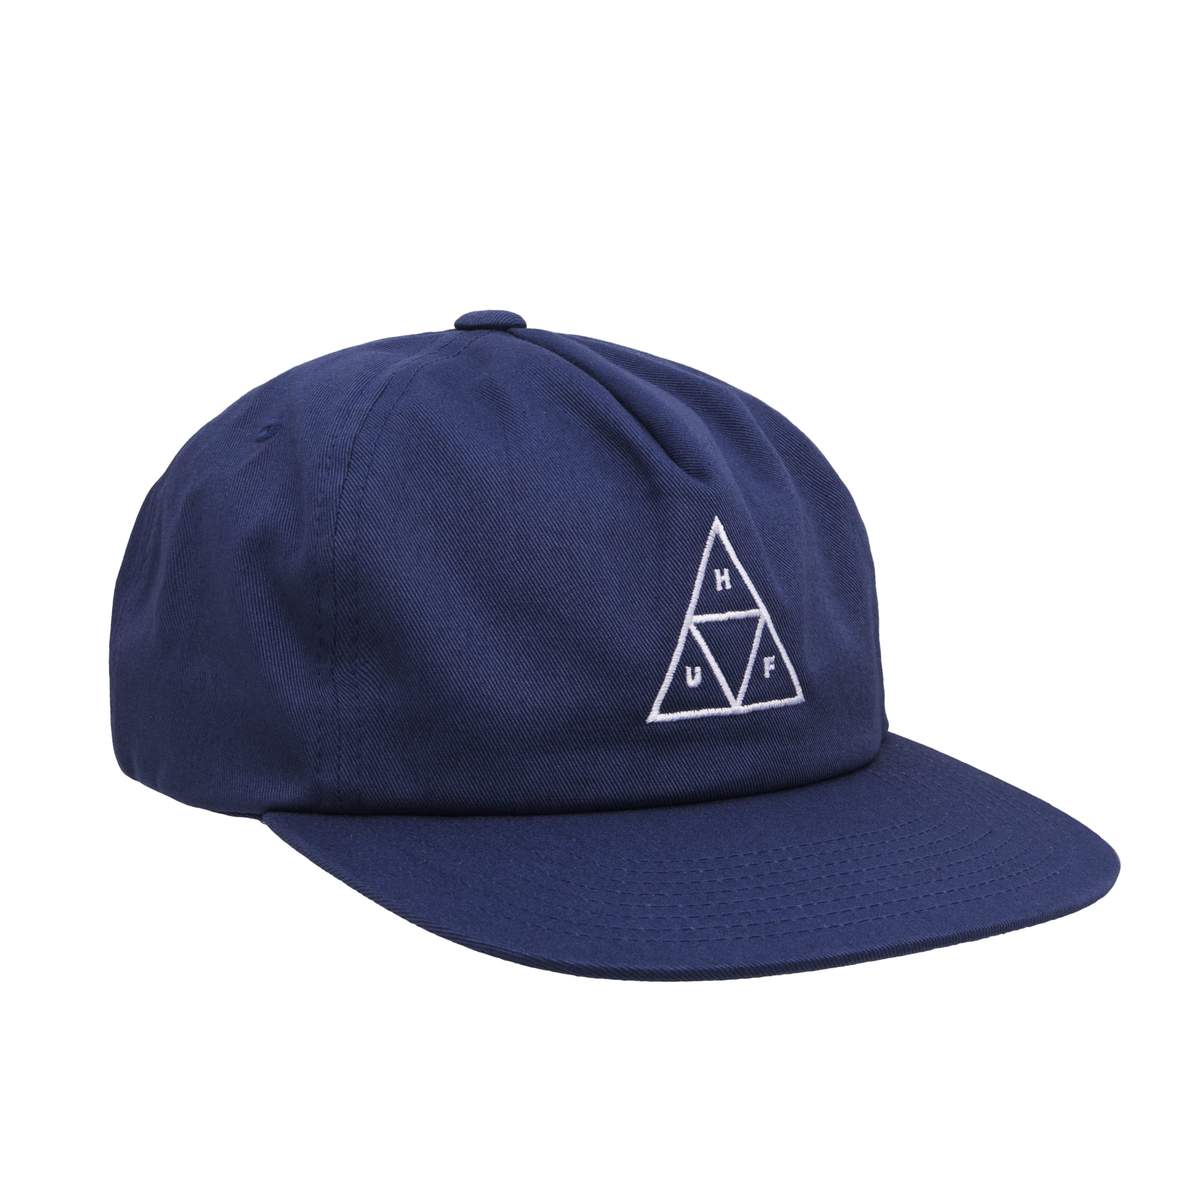 HUF ESSENTIALS TRIPPLE TRIANGLE UNSTRUCTURED SNAPBACK NAVY - The Drive Skateshop